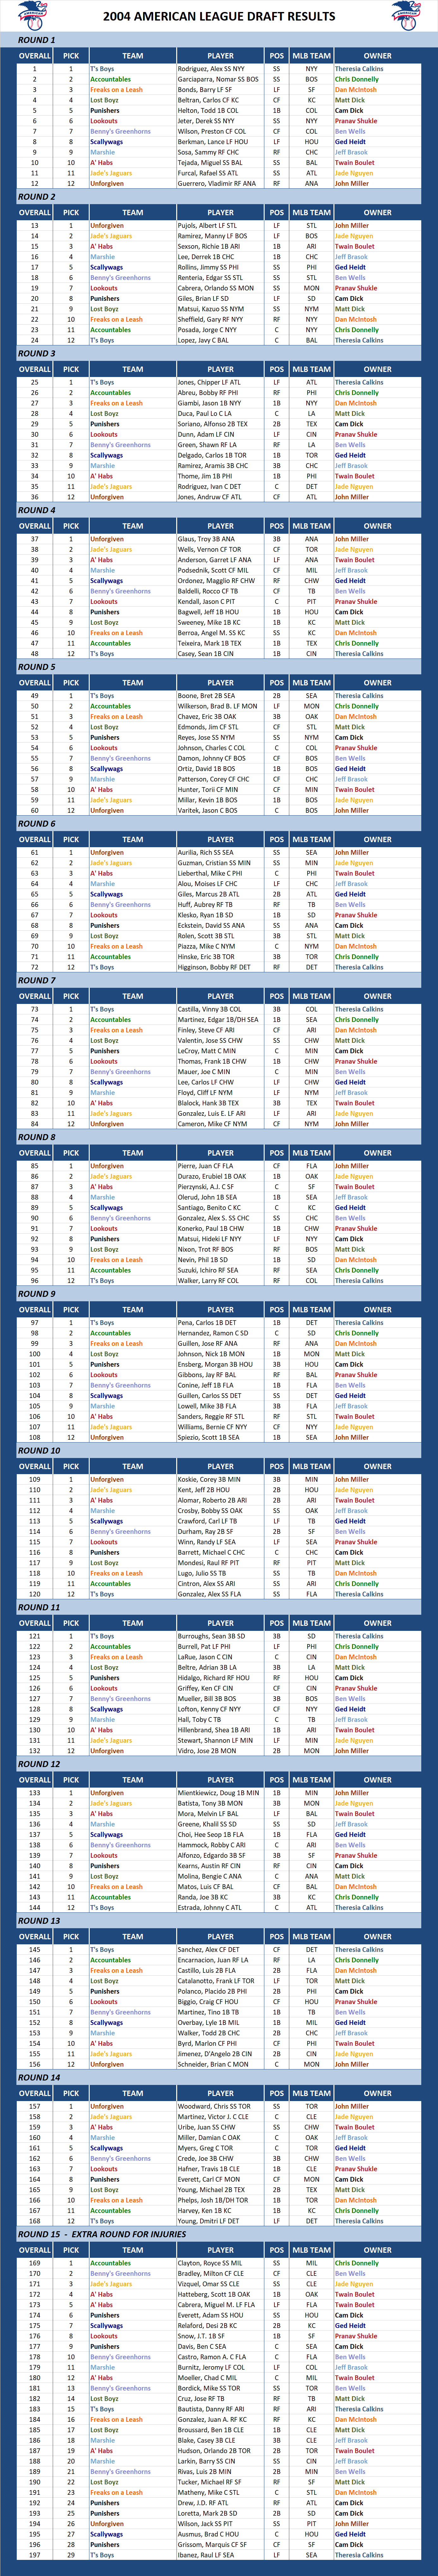 2004 American League Draft Results